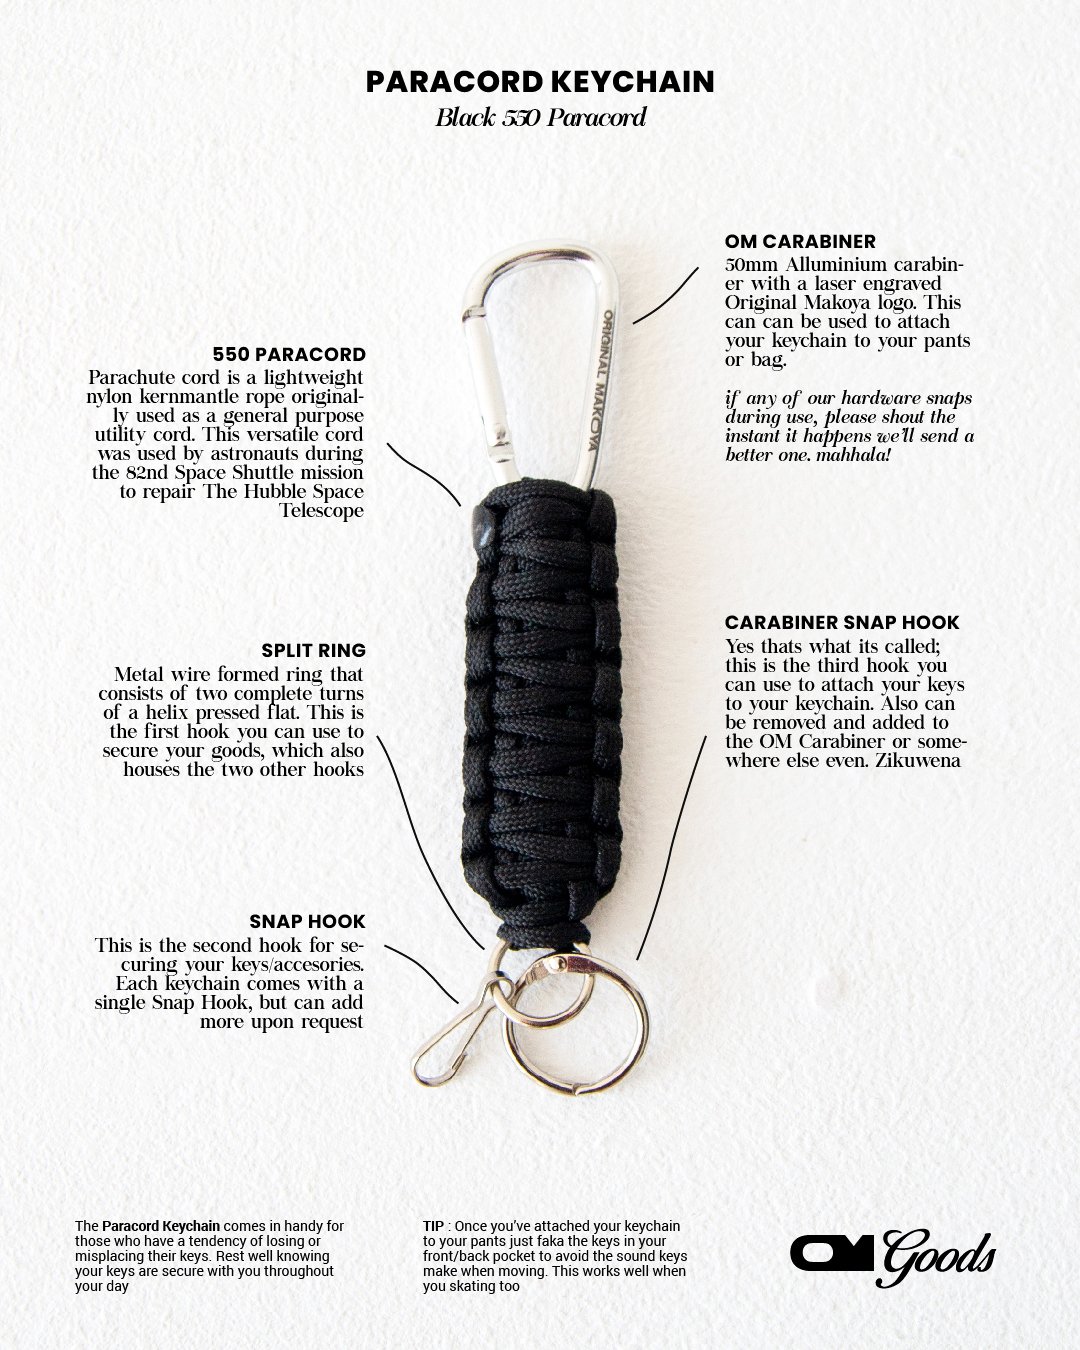 Original Makoya on X: The Paracord Keychain comes in handy for people who  have a tendency of losing their keys. Rest well knowing your keys are  secure with you throughout the day